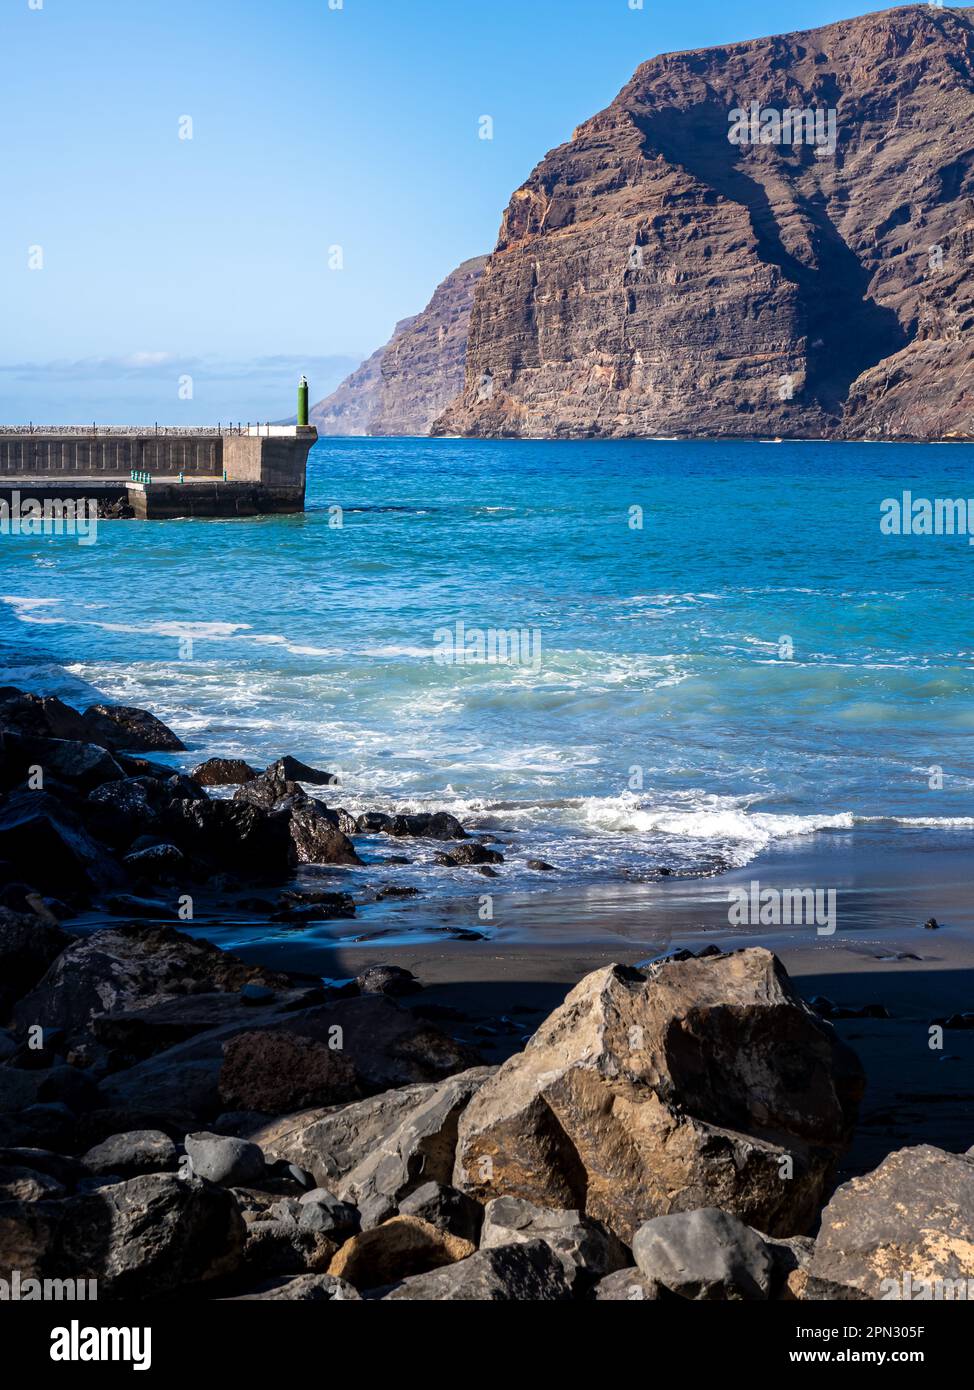 Sunlight on the majestic Los Gigantes cliffs and the black sand of Playa Los Guíos beach, with Los Gigantes harbor entrance and rugged rocks. Stock Photo